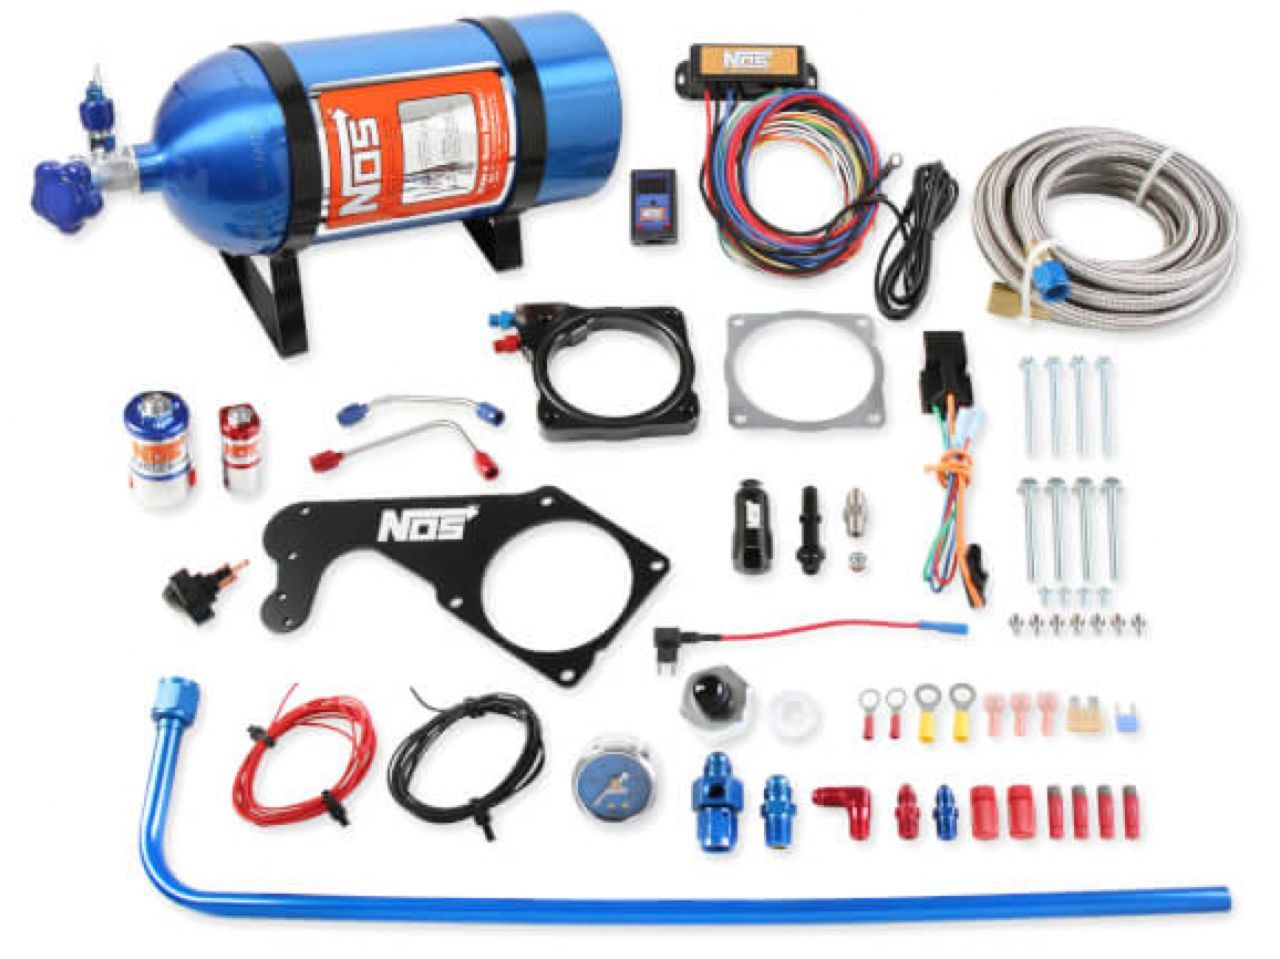 NOS Nitrous Oxide Kits and Accessories 05184NOS Item Image